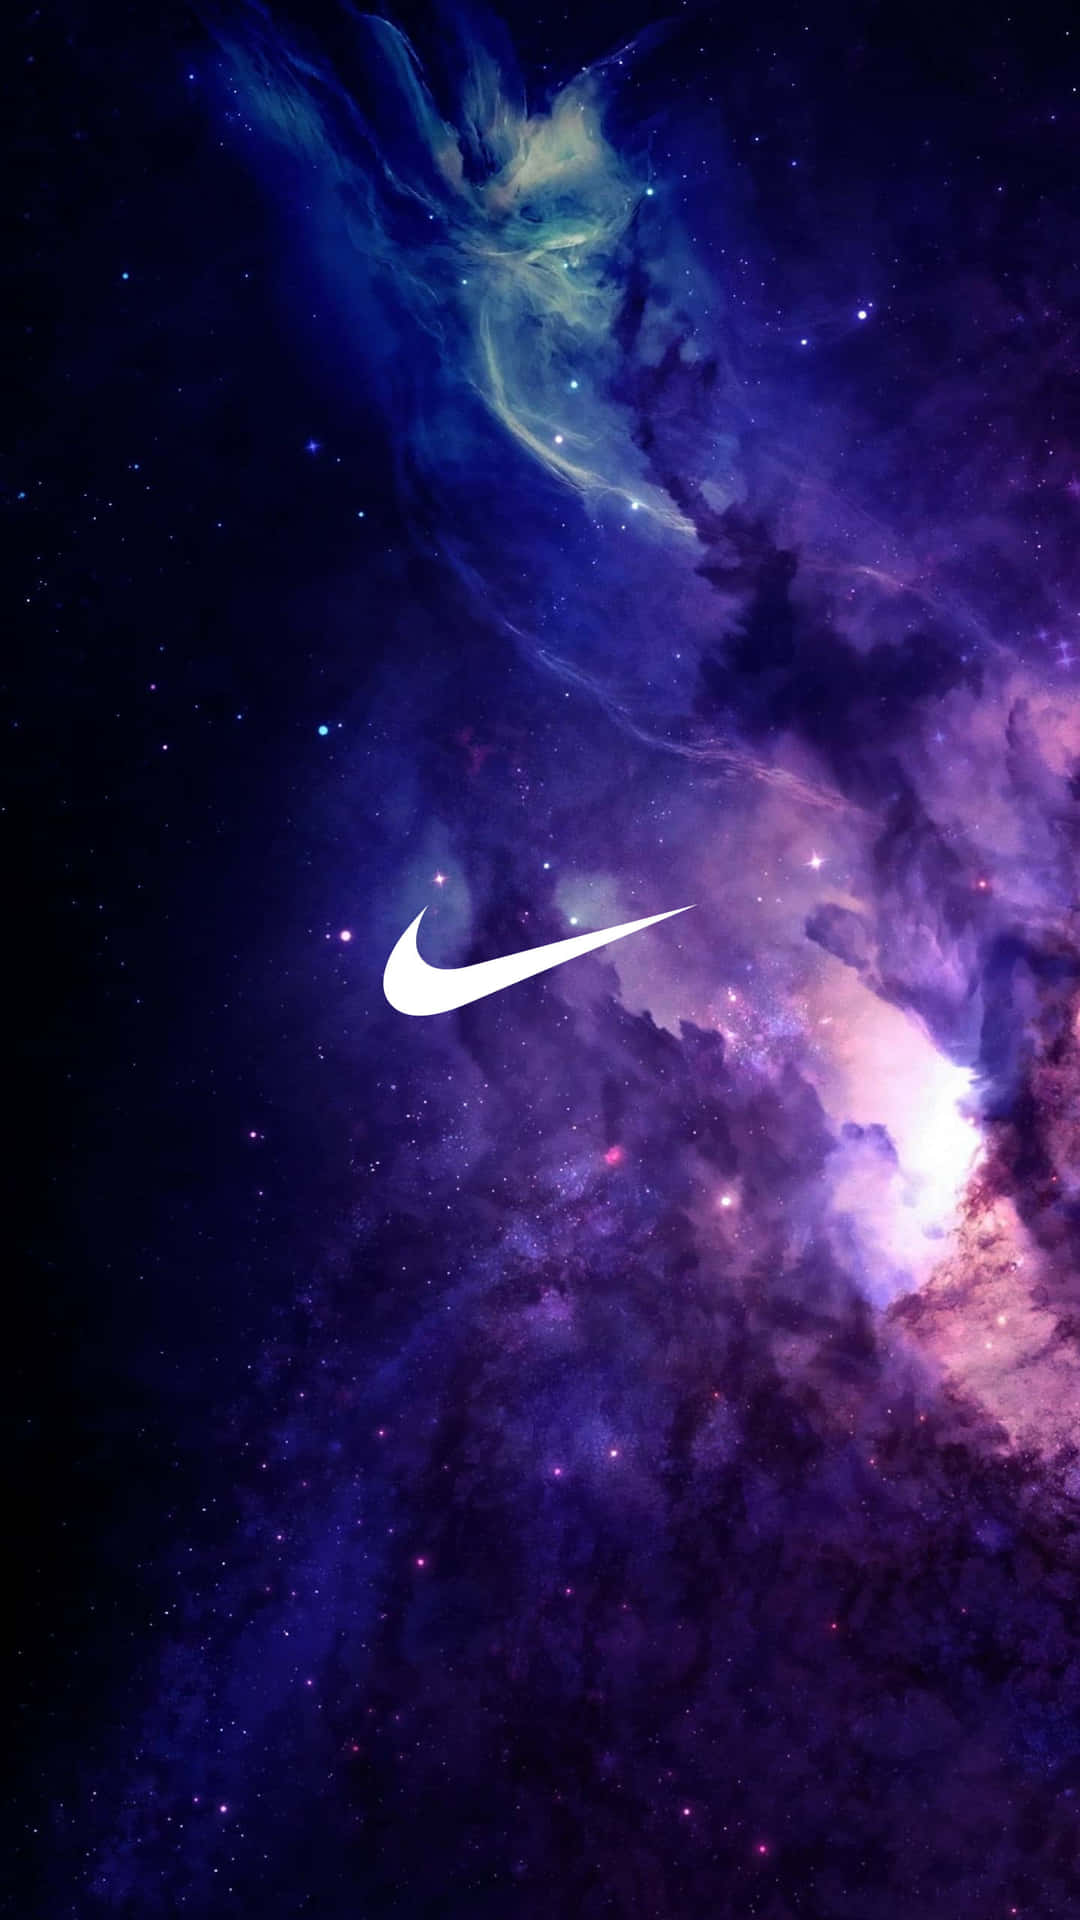 Nike Logo In The Space With Purple And Blue Stars Wallpaper